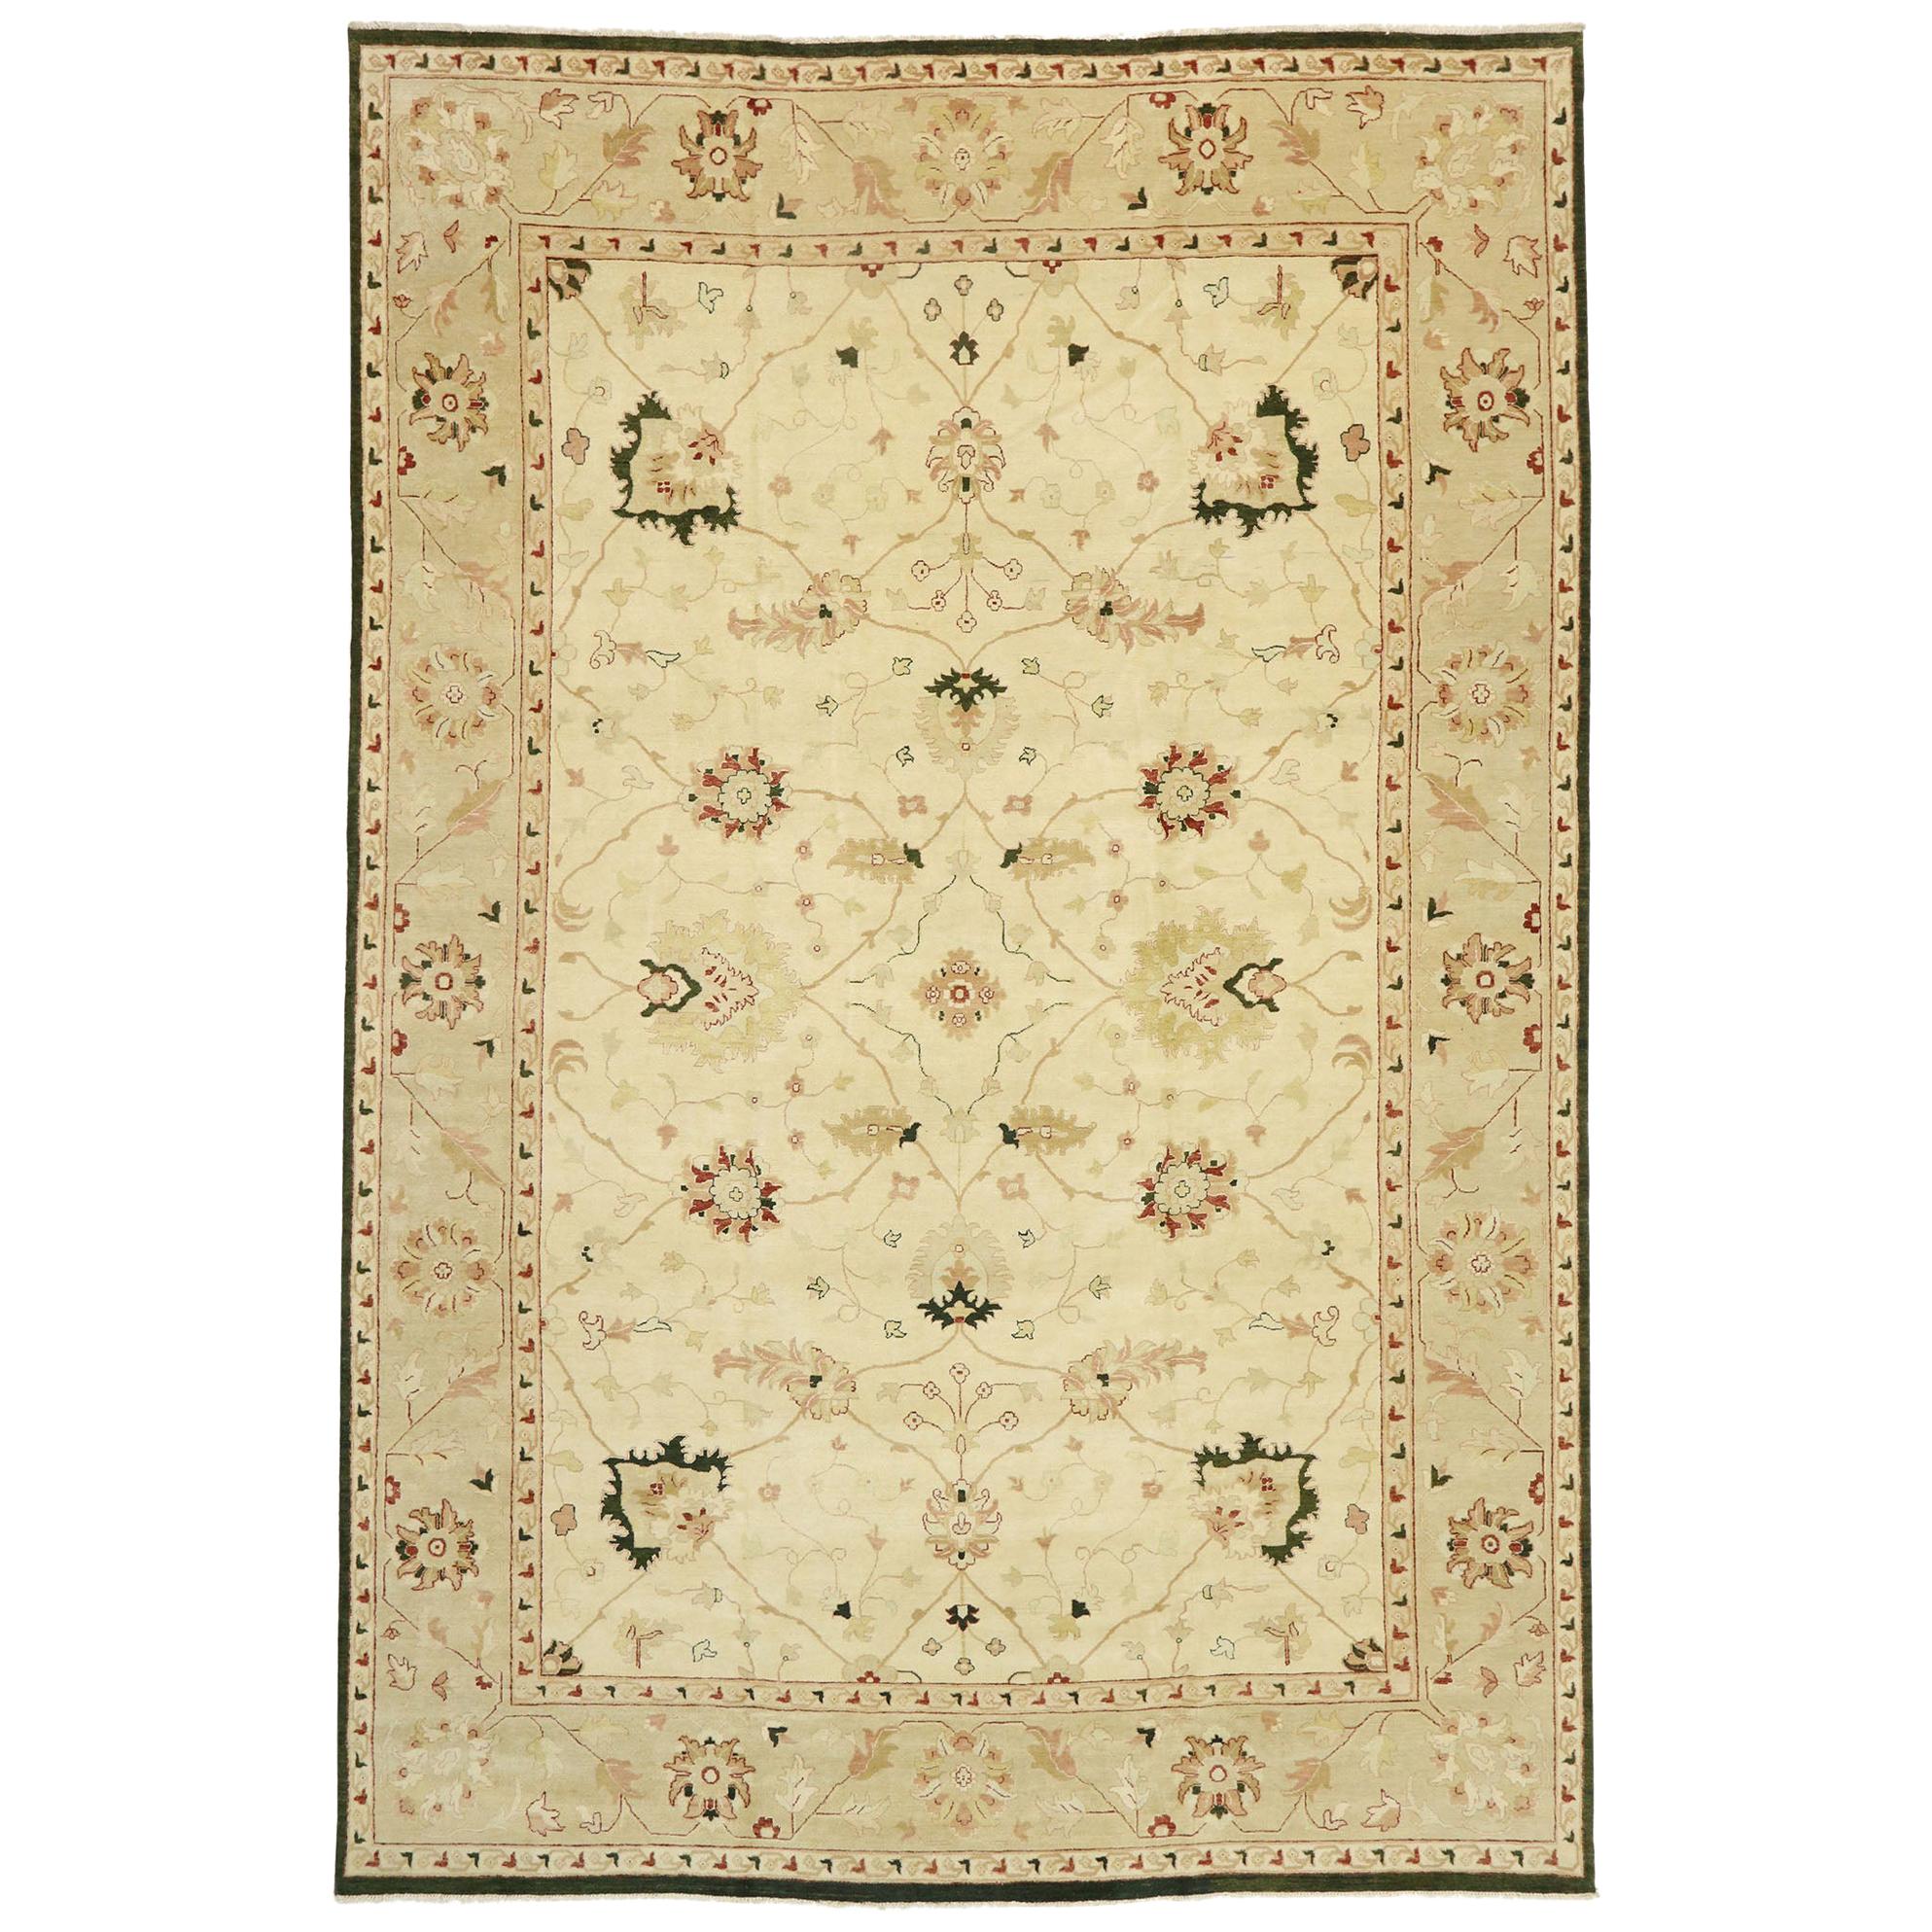 New Contemporary Persian Mahal Indian Rug with Modern Arts & Crafts Style (tapis indien contemporain de style mahalais et moderne)